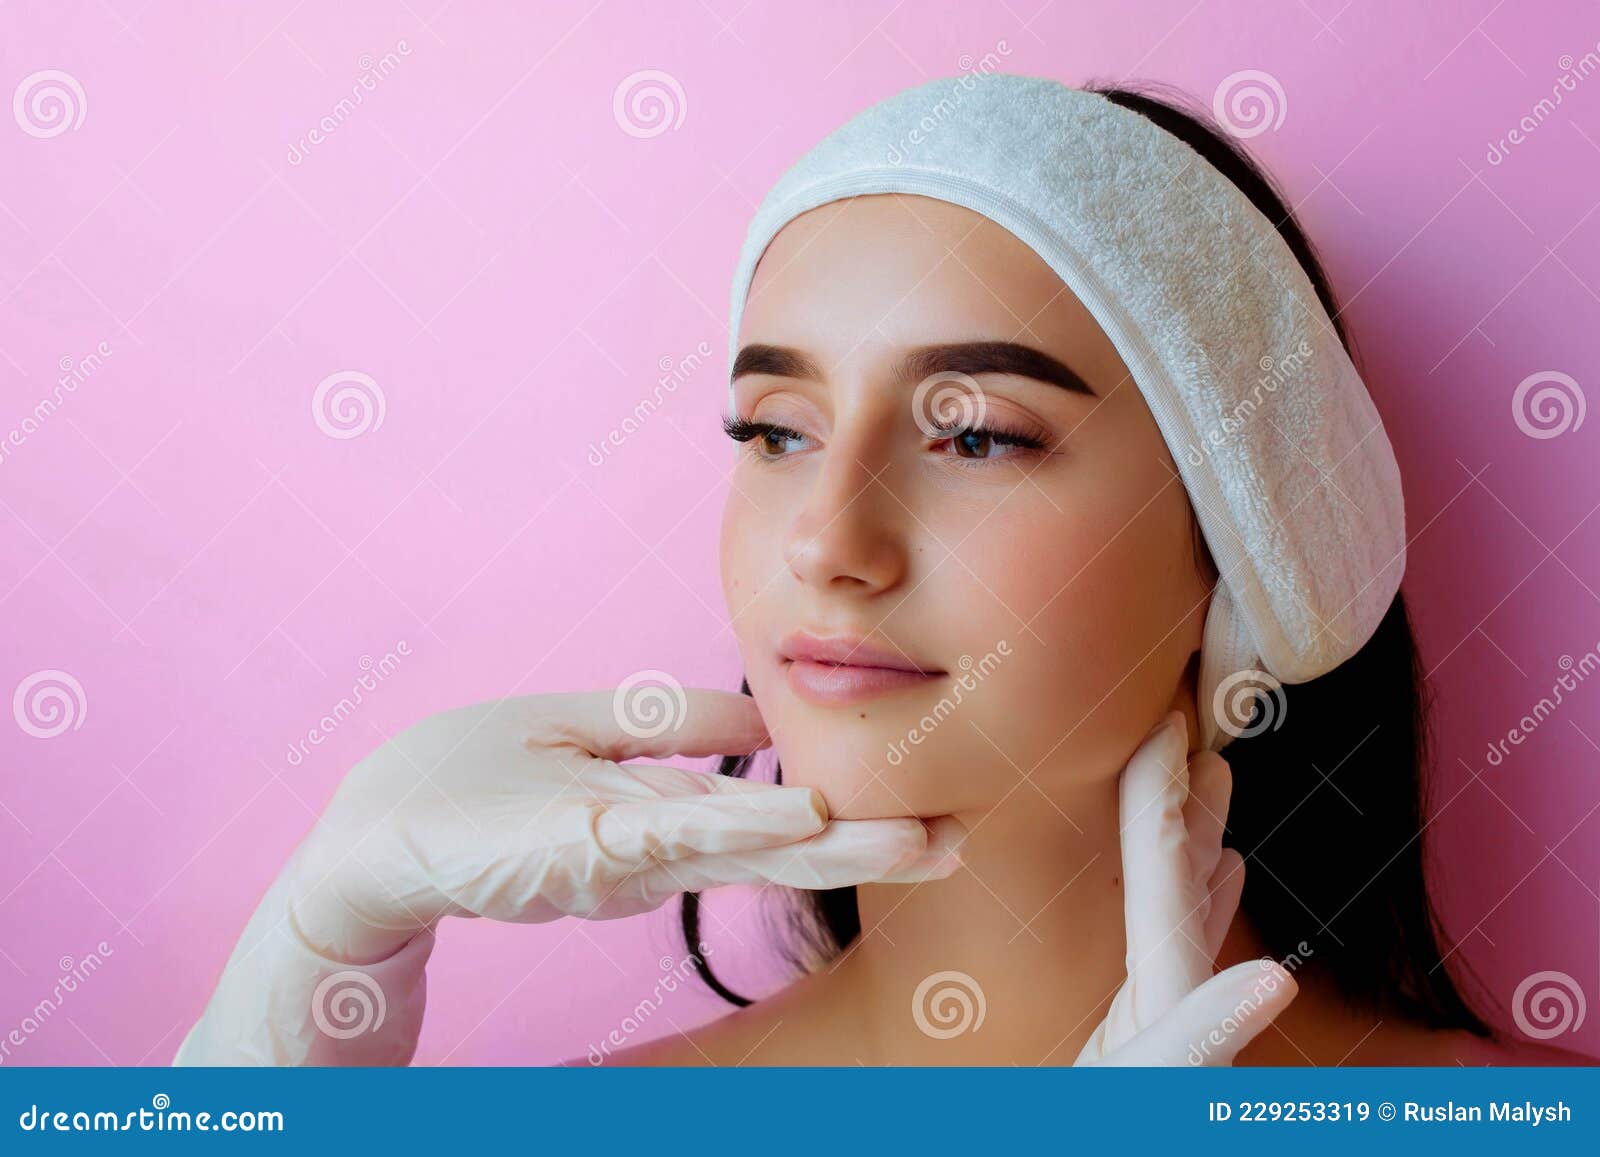 Caring For The Skin Cosmetic Cream On A Womanand X27s Face Stock Image Image Of Massage